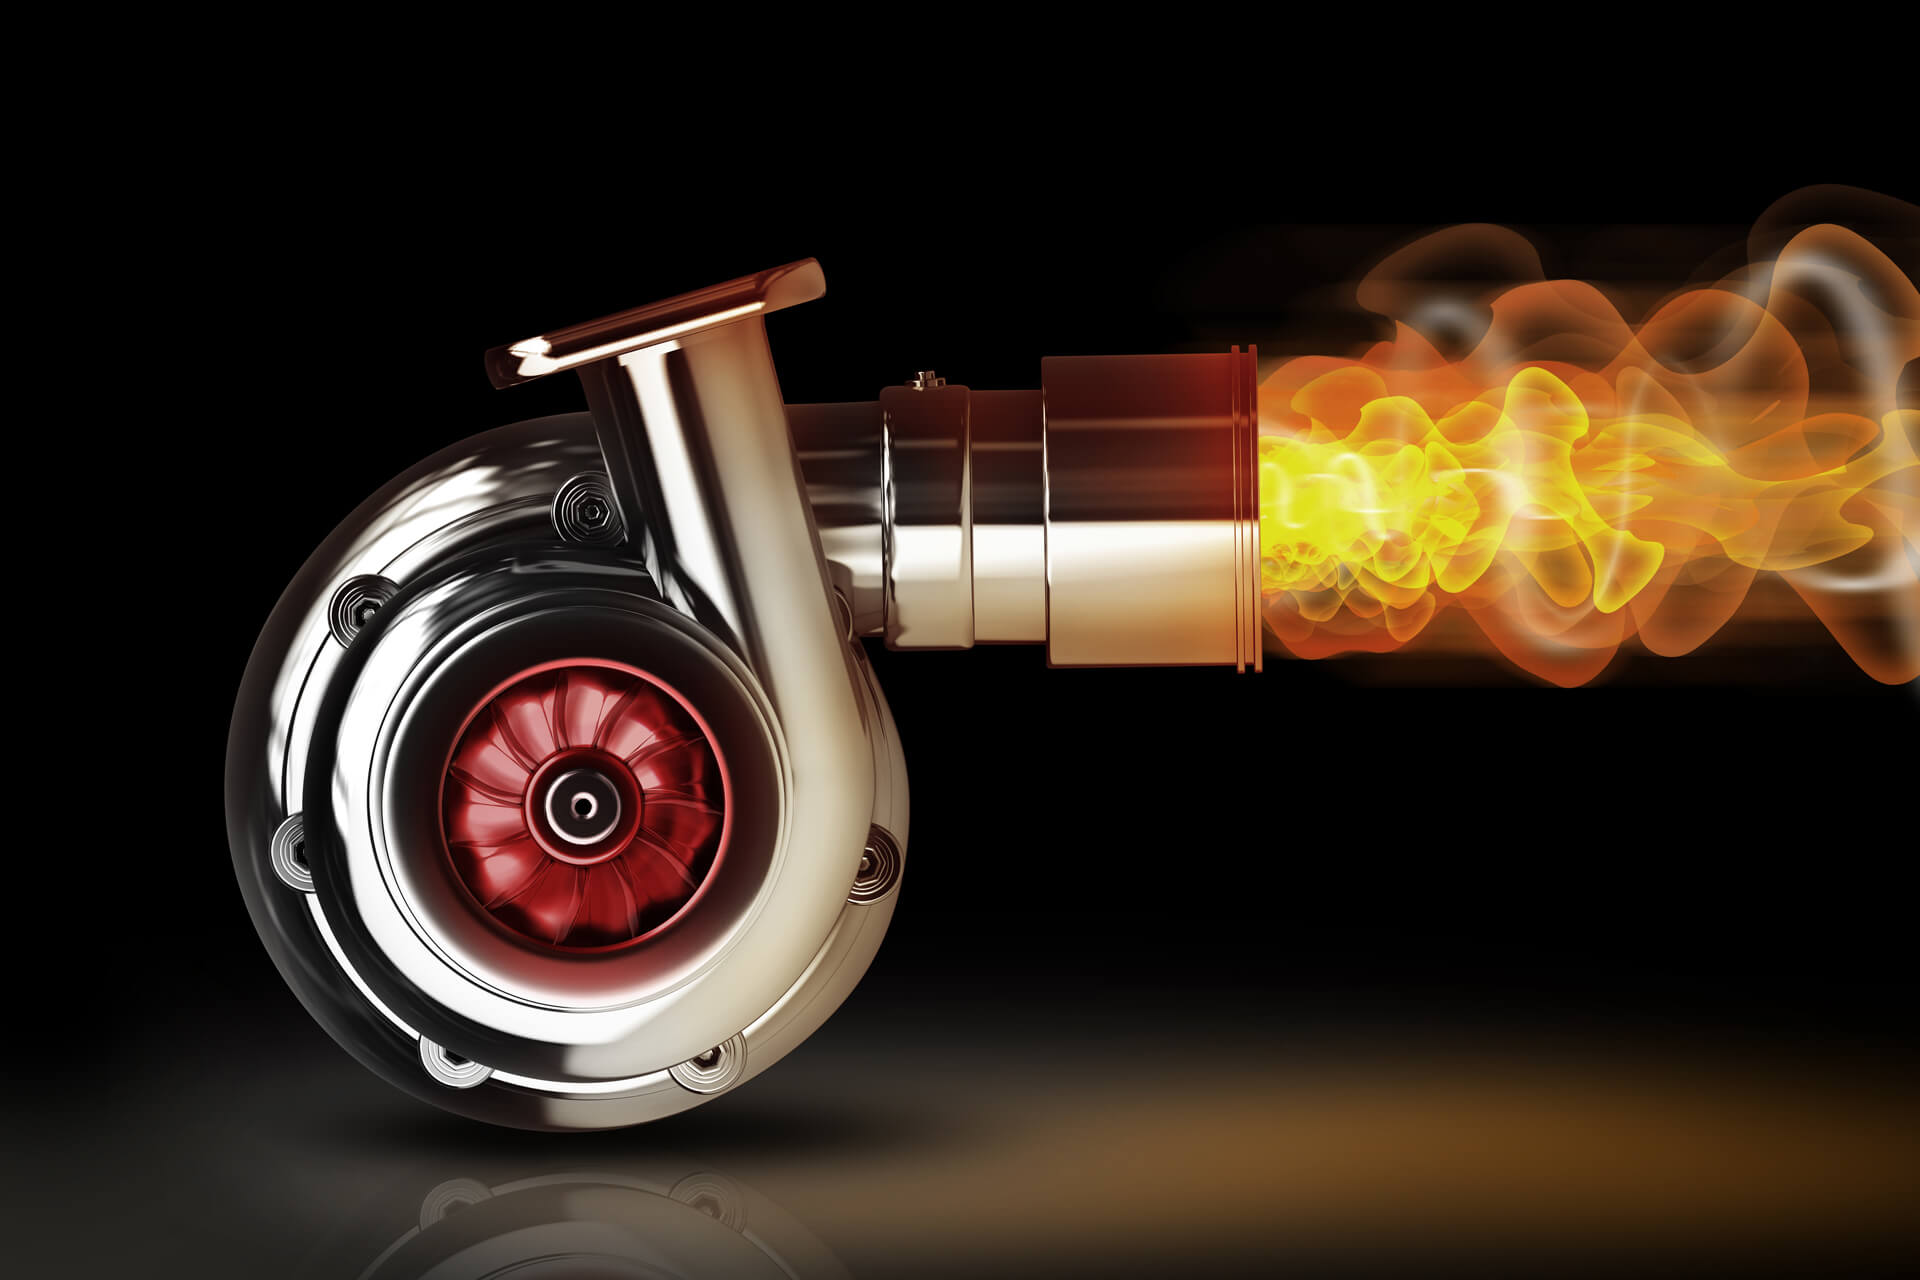 SUCK. SQUEEZE. BANG. BLOW: The beginner’s guide to turbos